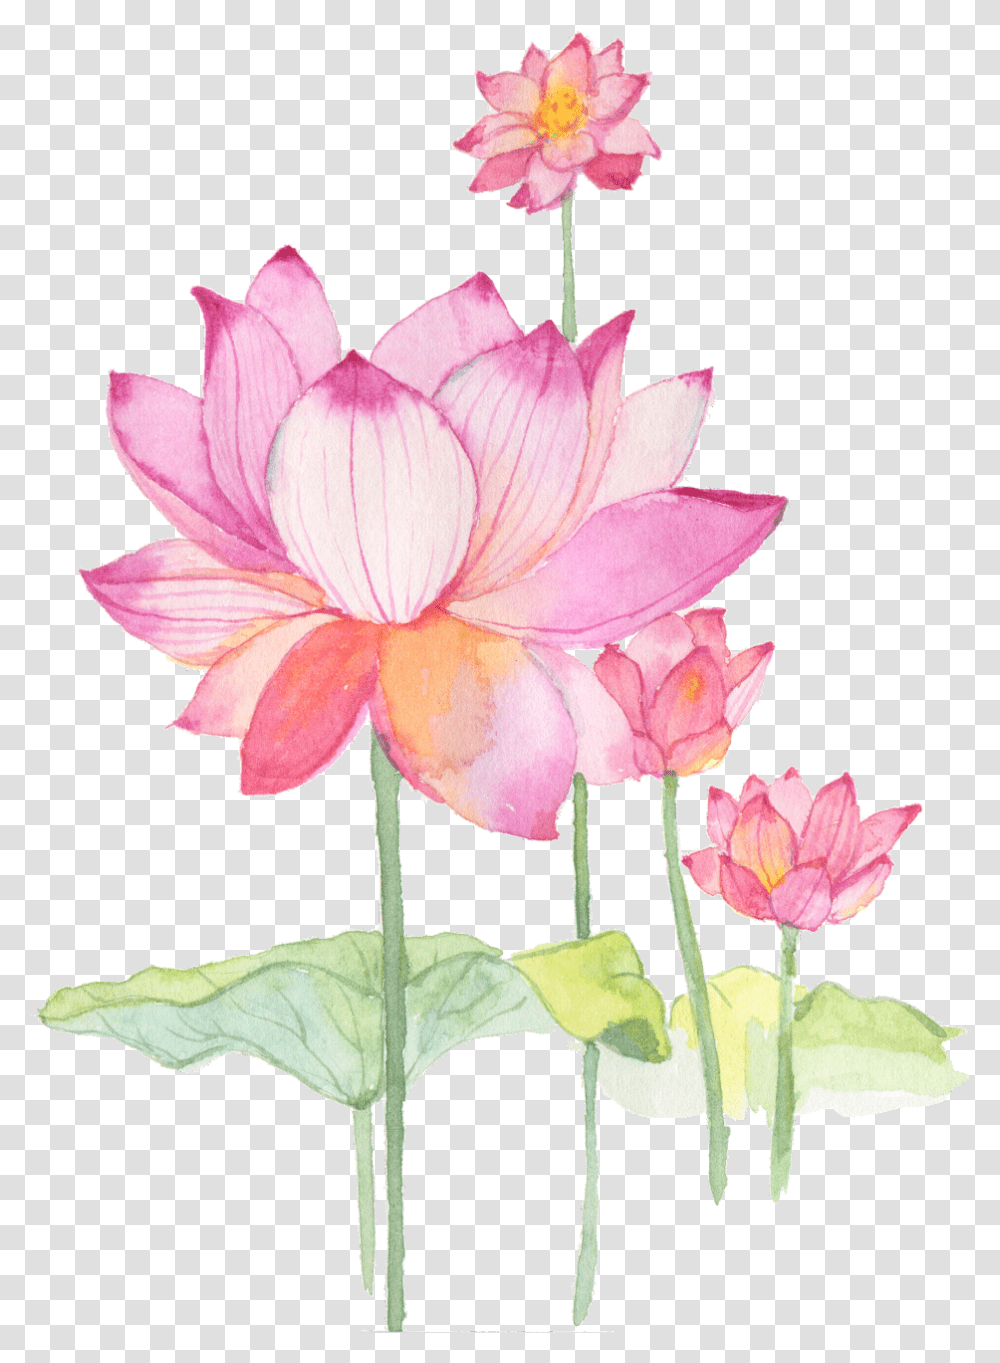 Flower Lotus Chinese Sacred Lotus, Plant, Blossom, Lily, Pond Lily Transparent Png